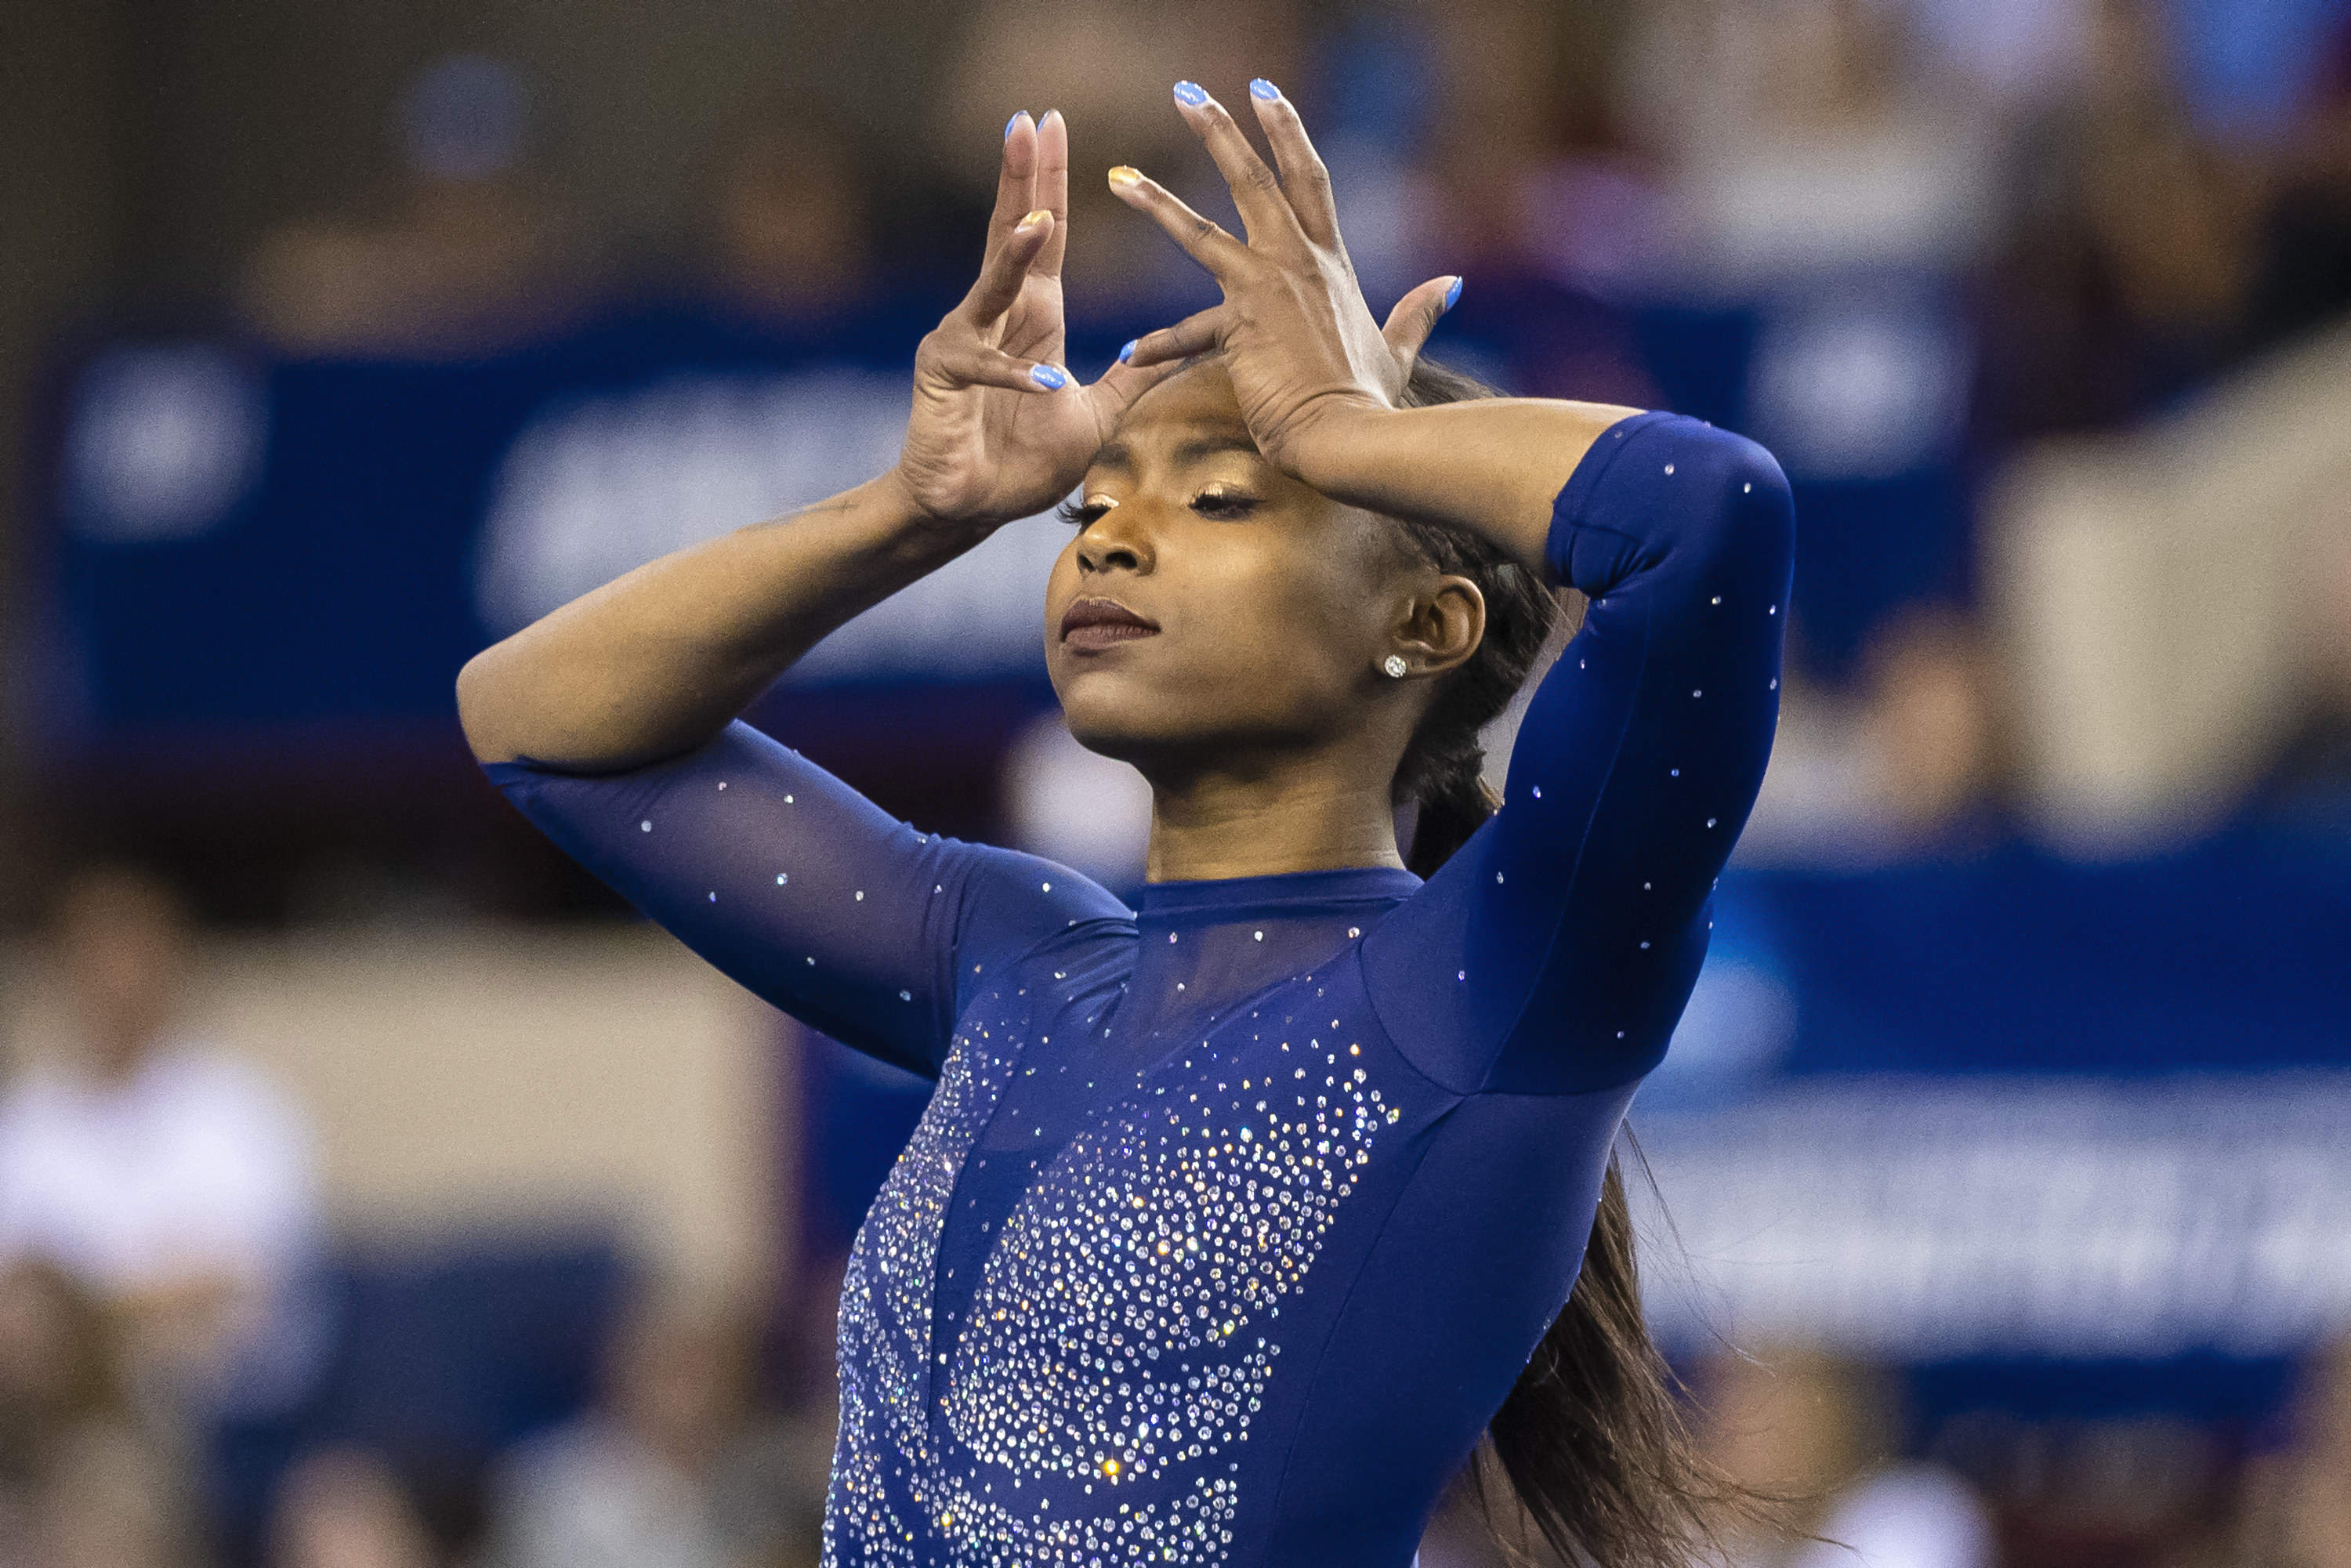 Gymnast Nia Dennis poses during her floor routine